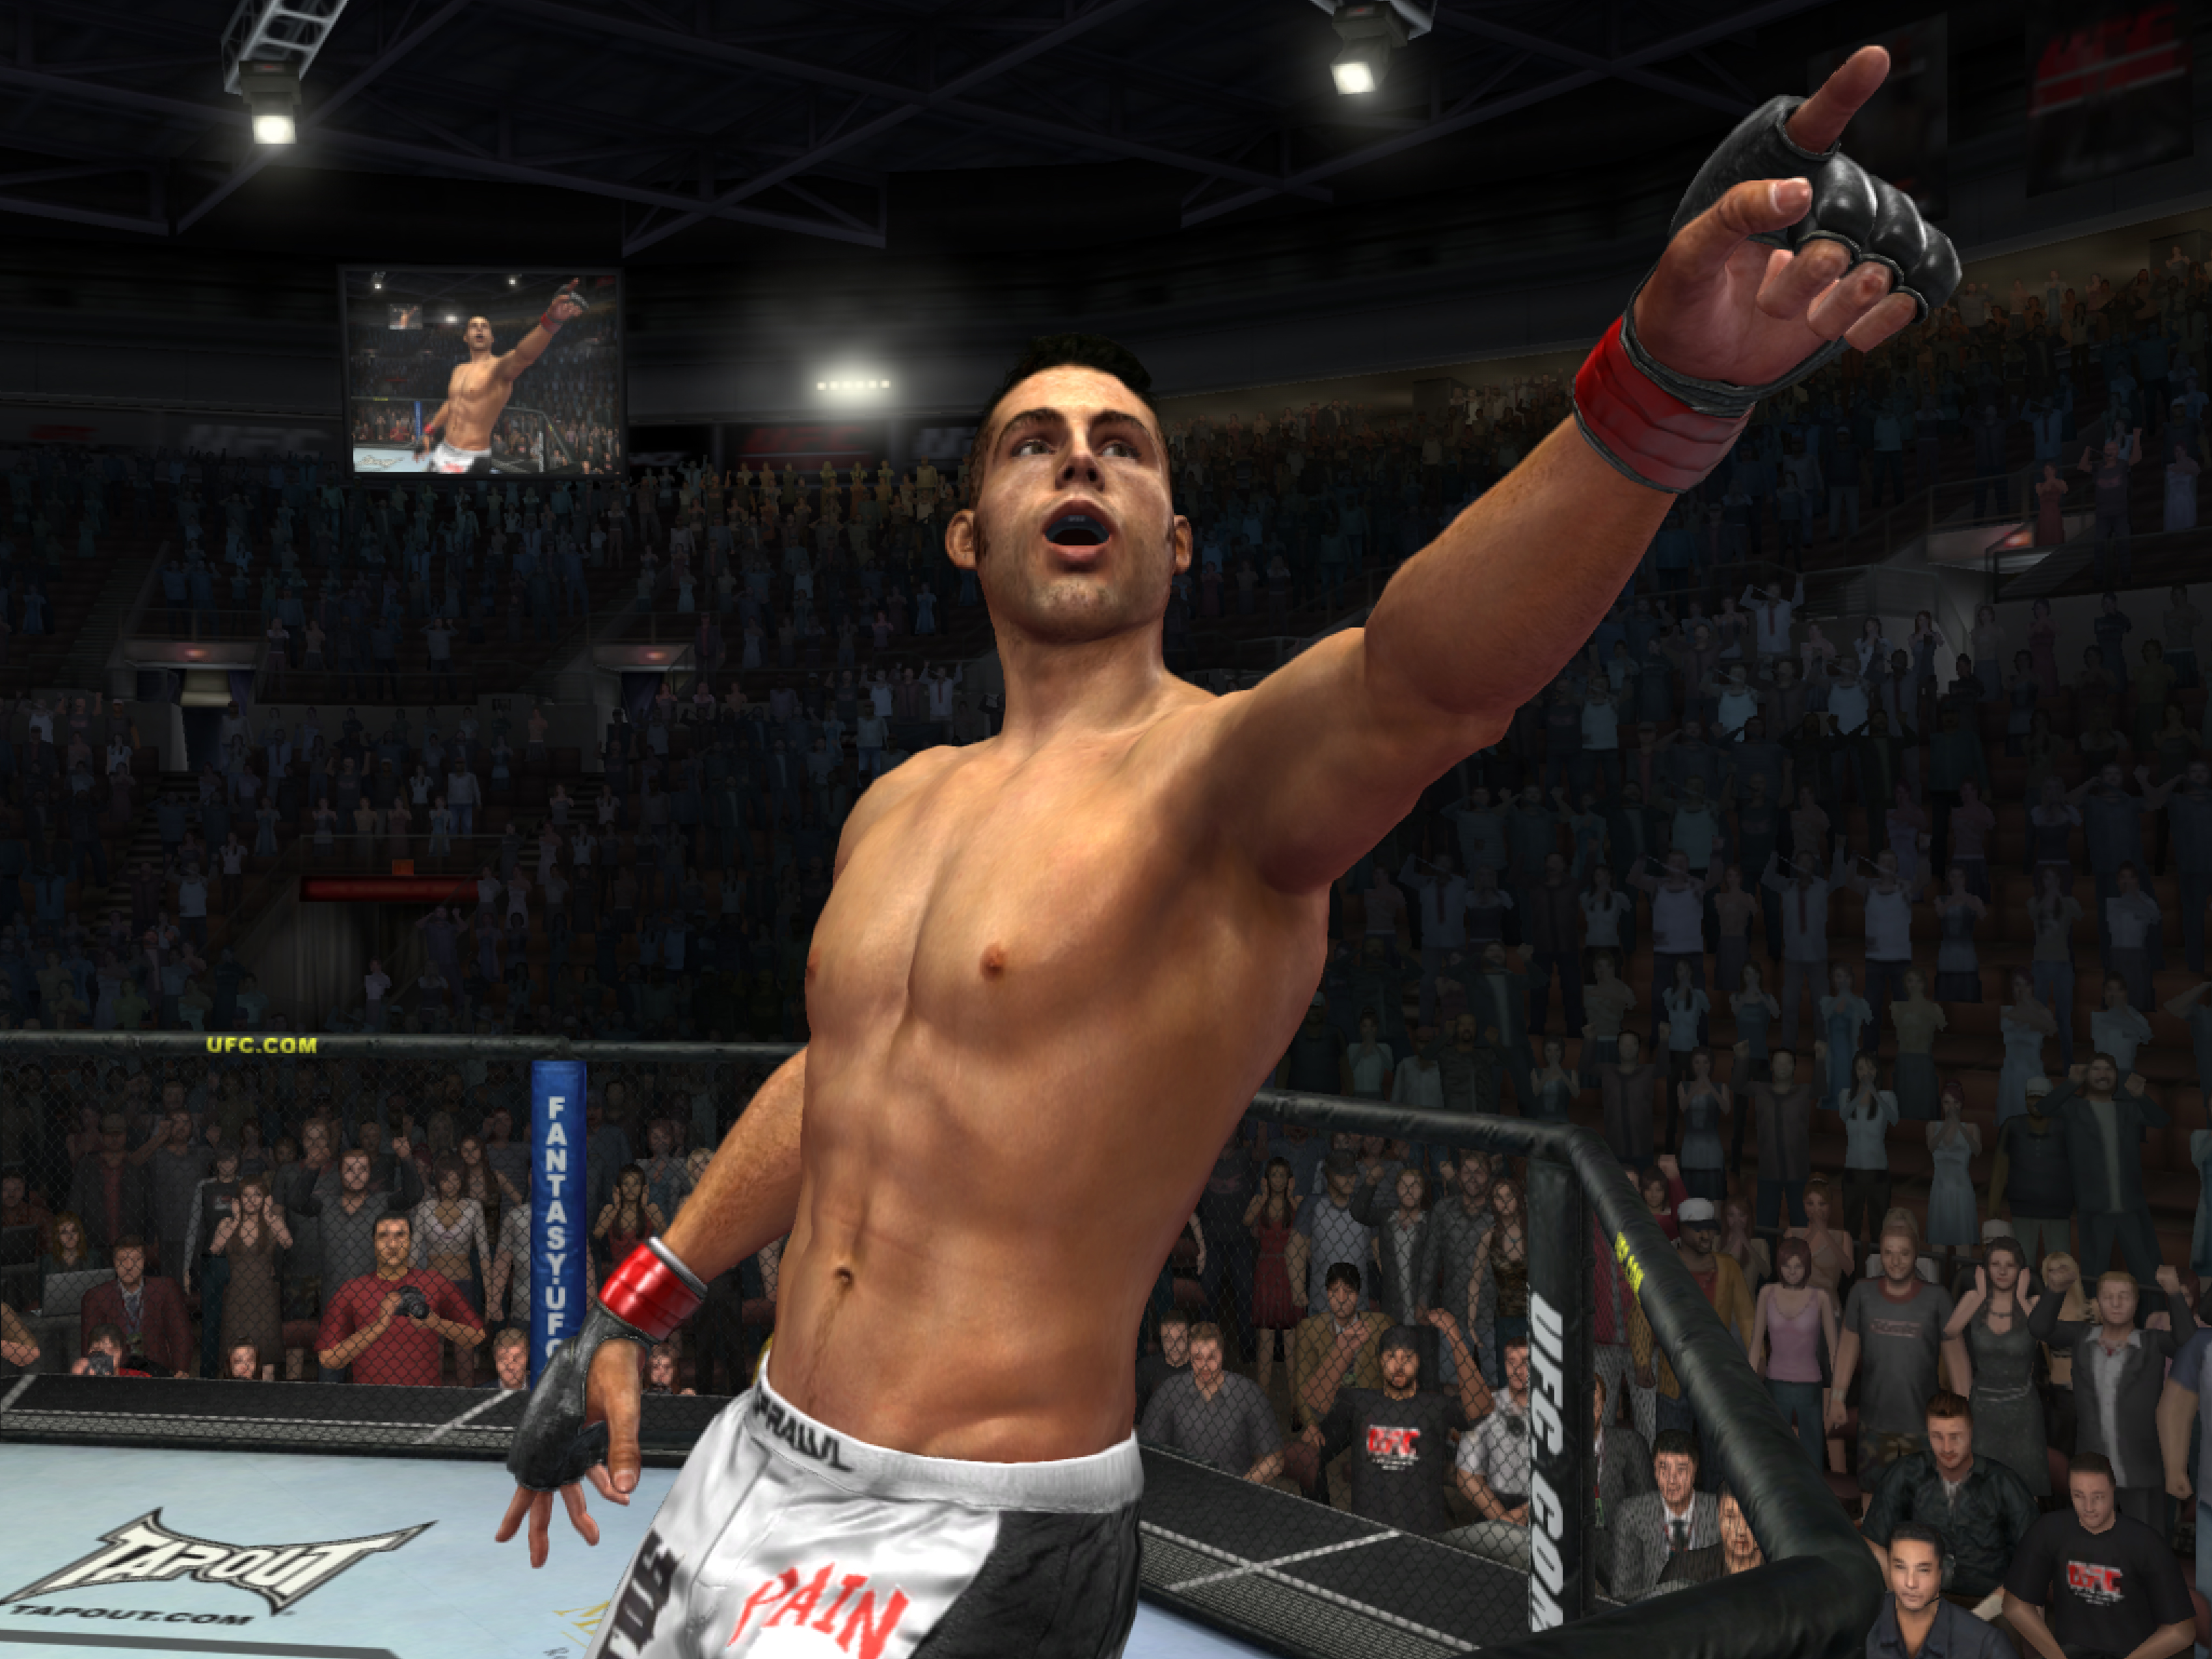 Mike Swick's character inside UFC's 2010 Undisputed Video Game.